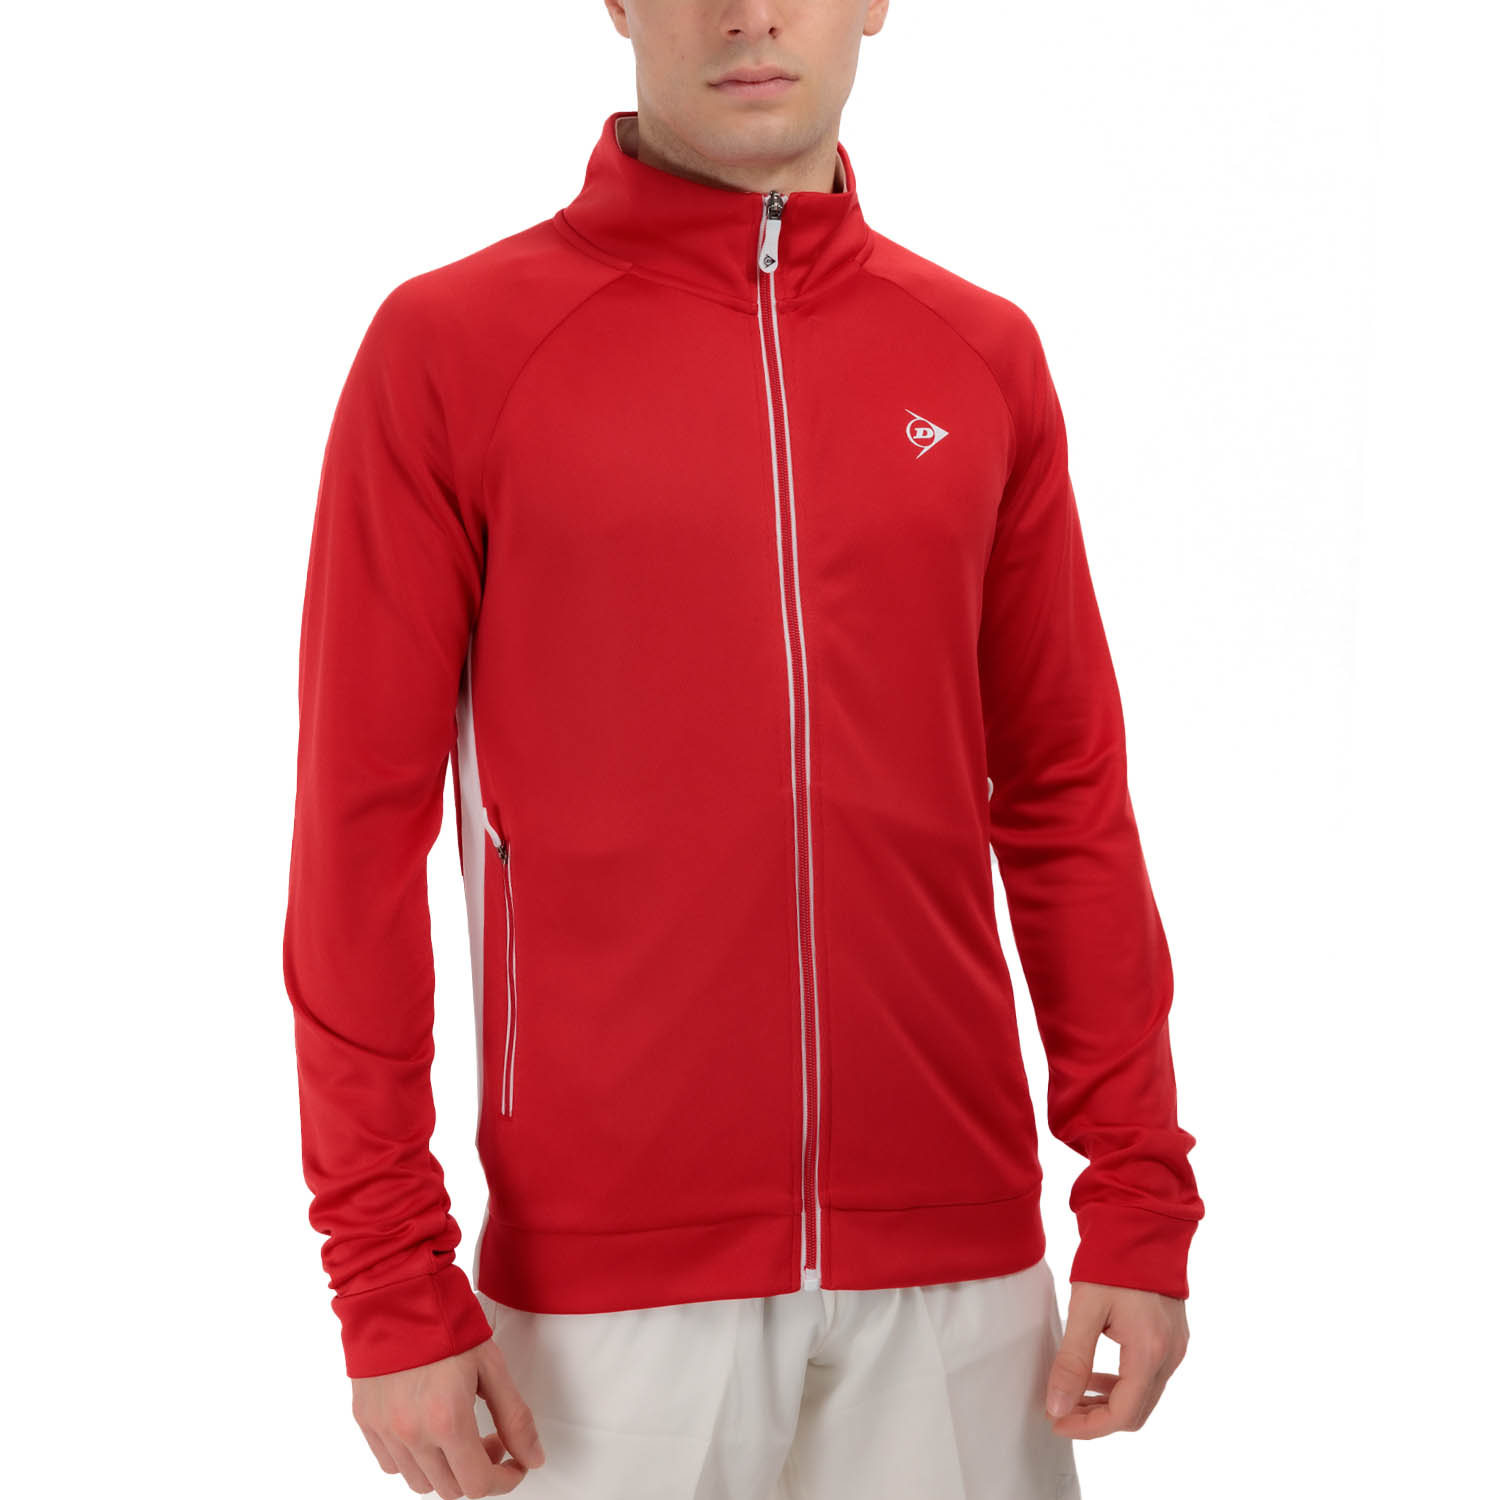 Dunlop Club Knitted Men's Tennis Jacket - Red/White